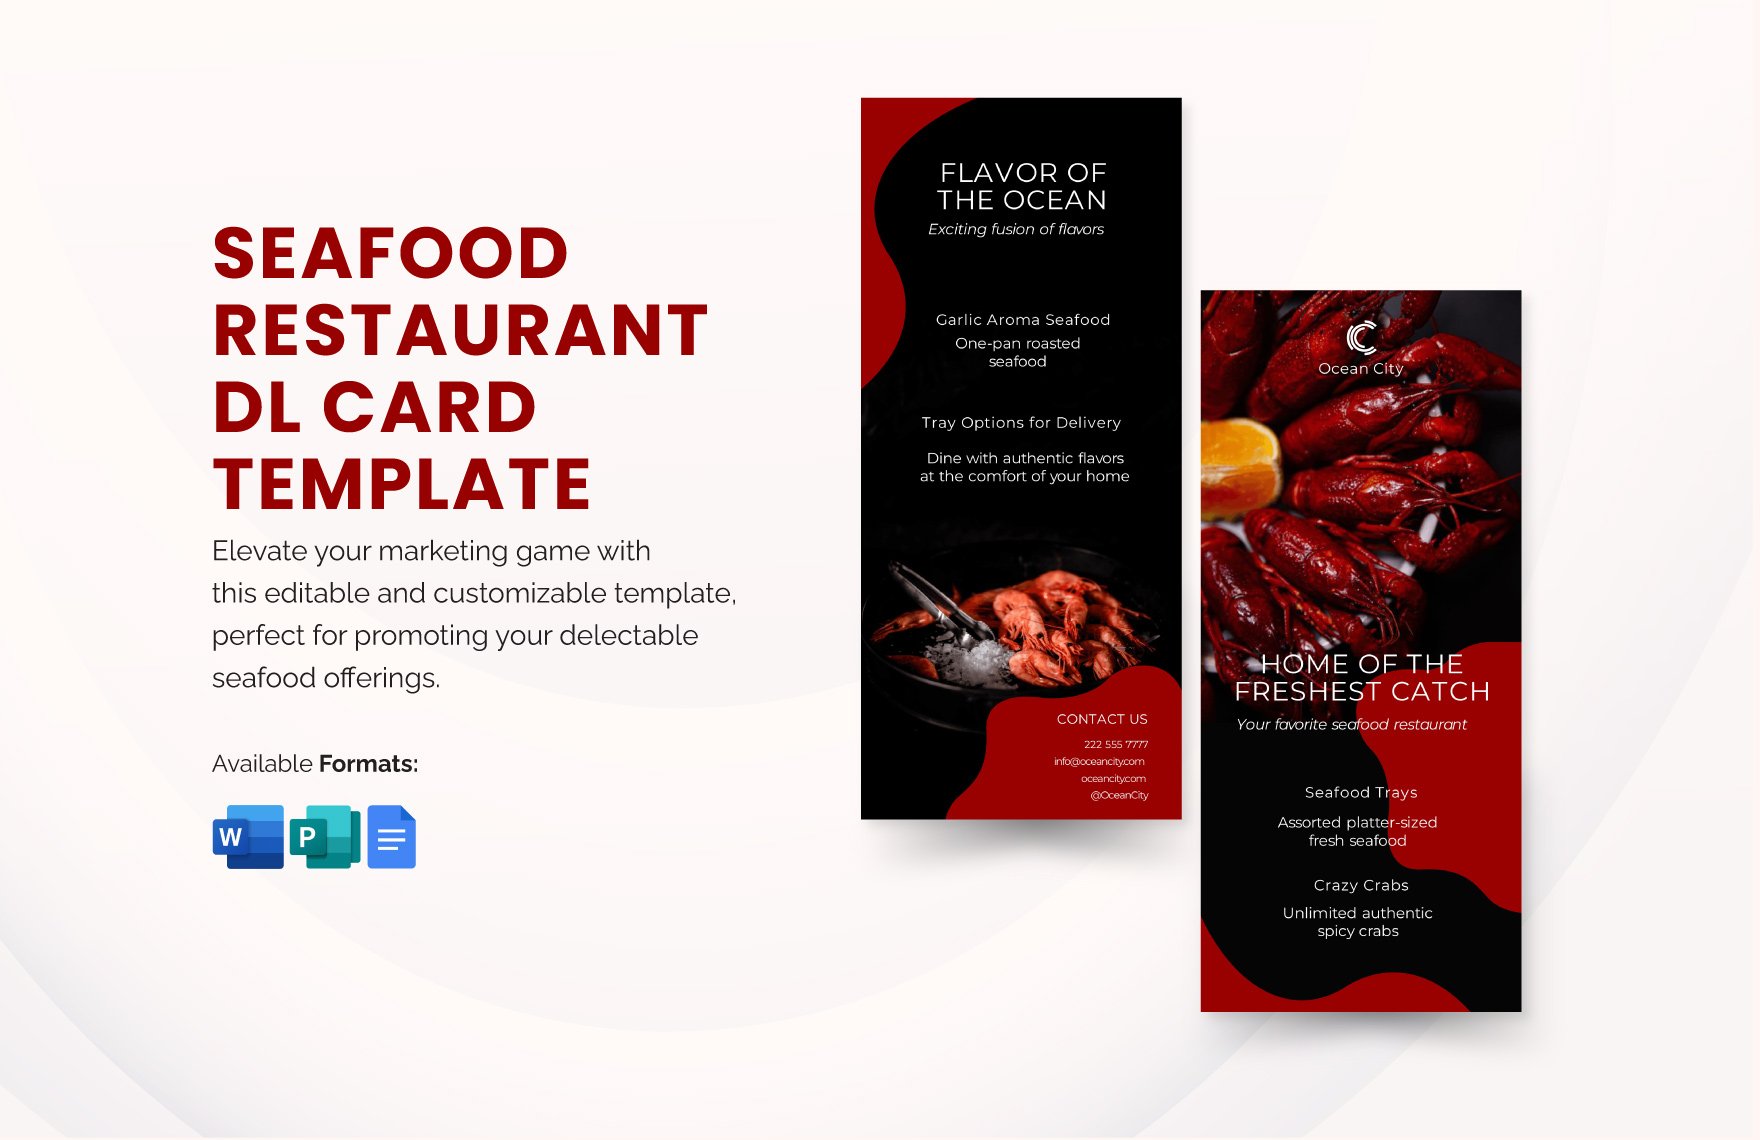 Seafood Restaurant DL Card Template in Word, Google Docs, Publisher